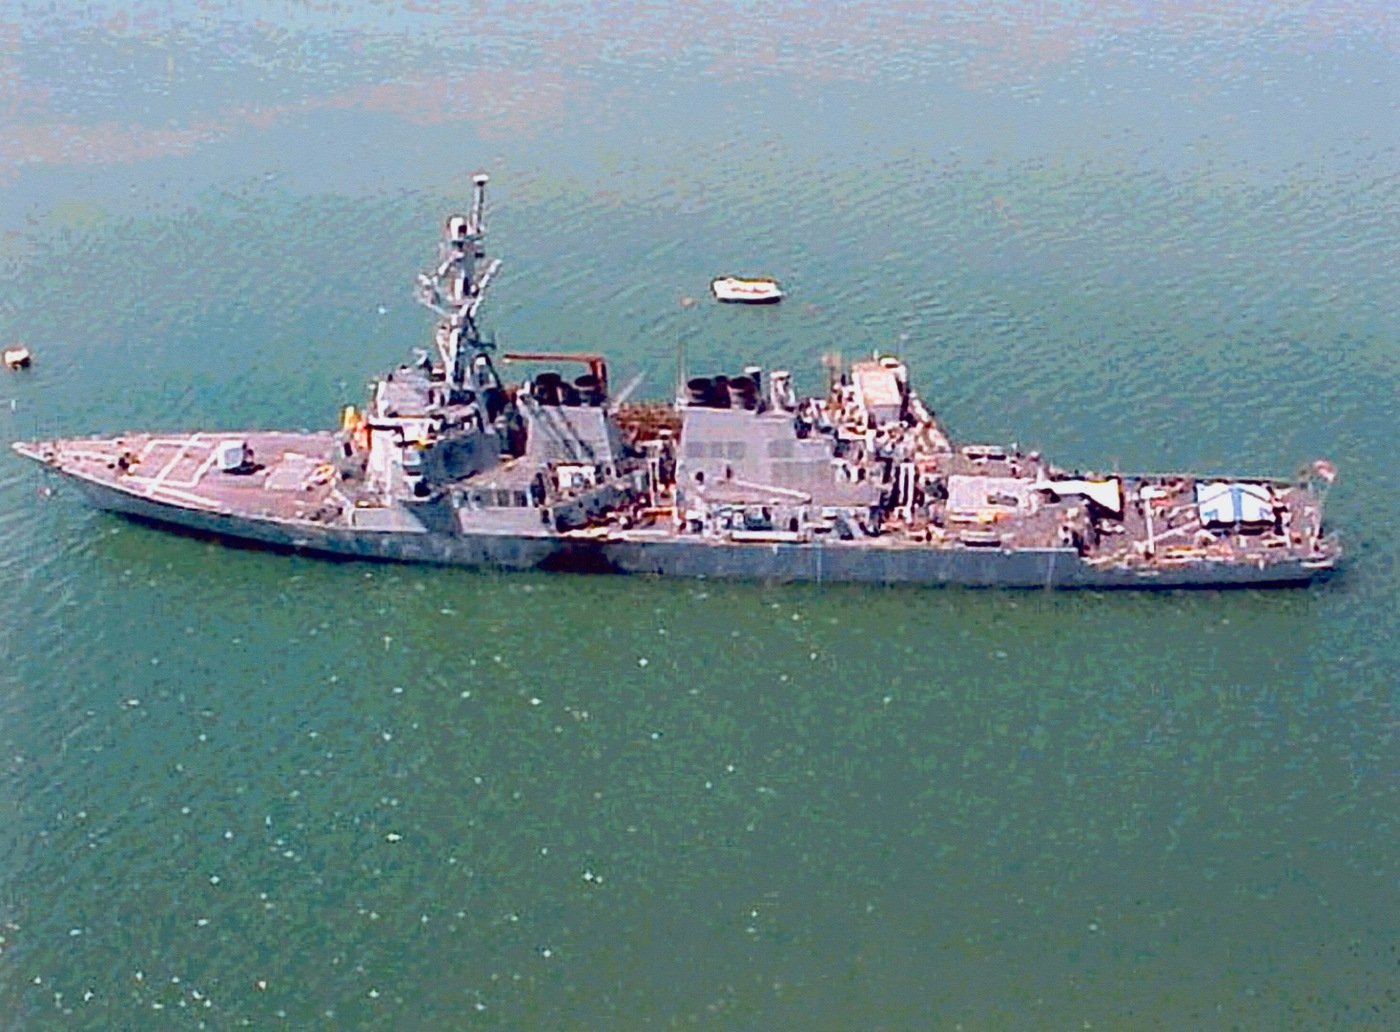 The USS Cole, a Navy guided missile destroyer, following the suicide attack in the port of Aden, Yemen on October 12, 2000.